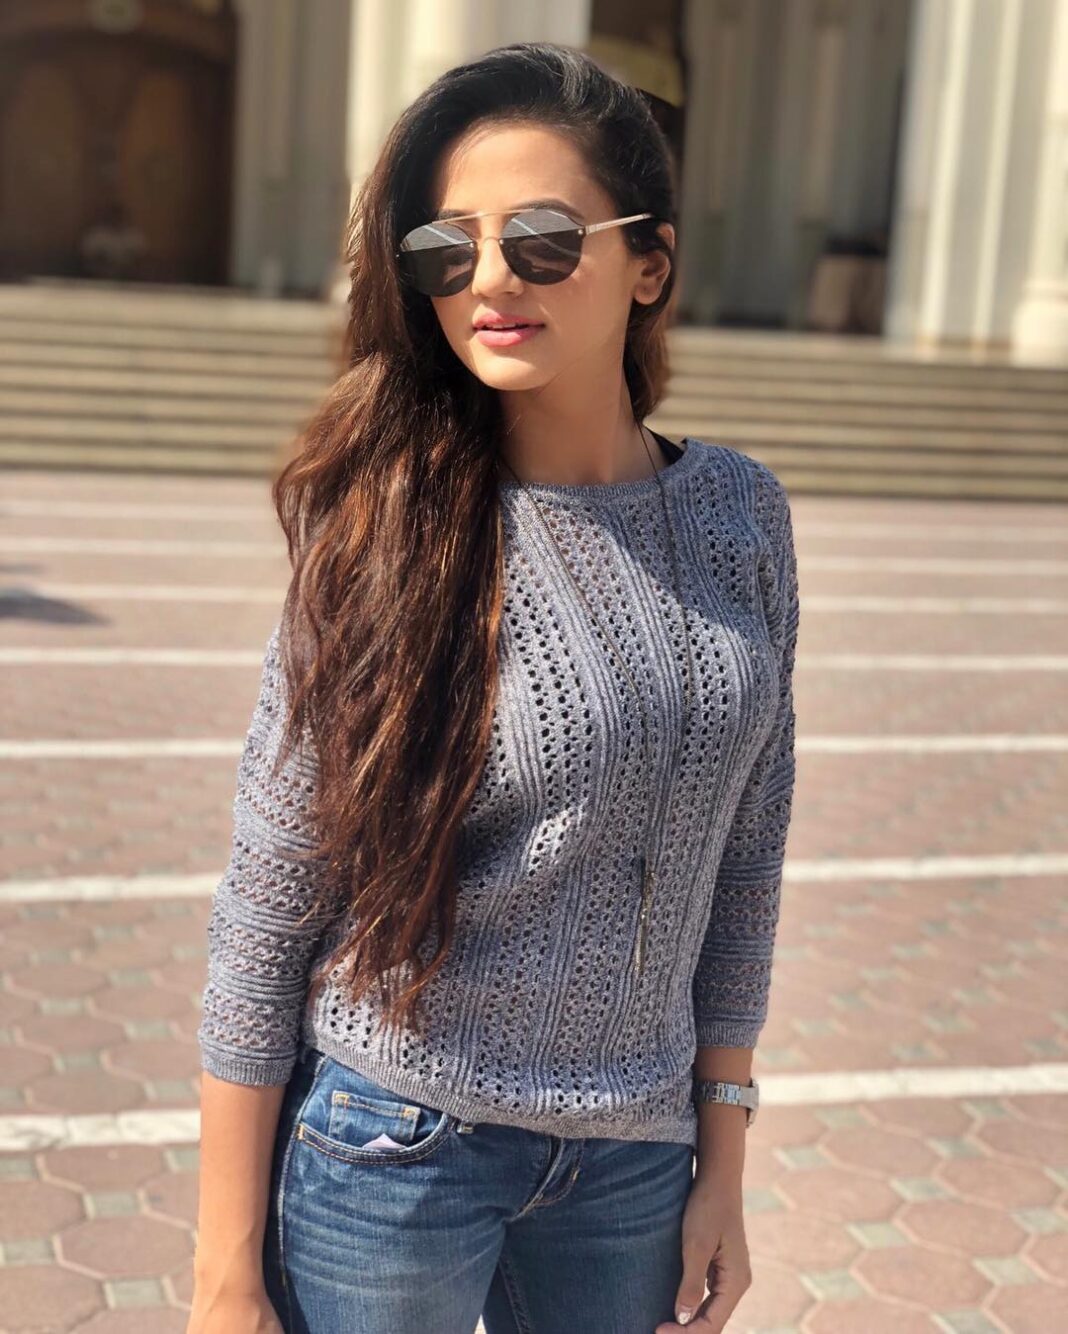 Helly Shah Instagram - Hii Guys ... So I have hand-picked some more clothes at affordable prices on Spoyl. These will keep your holiday fashion on point! Visit my store on Spoyl and shop from my collection. Use code: HELLYNOV to get EXTRA 15% off. Also, don't forget to check out Spoyl's trendy and well-curated collection from the best brands. You will love it ❤ @spoylapp #Spoyl #Spoylapp #Spoylstar . . . . . In association with @hashtagde #tagde